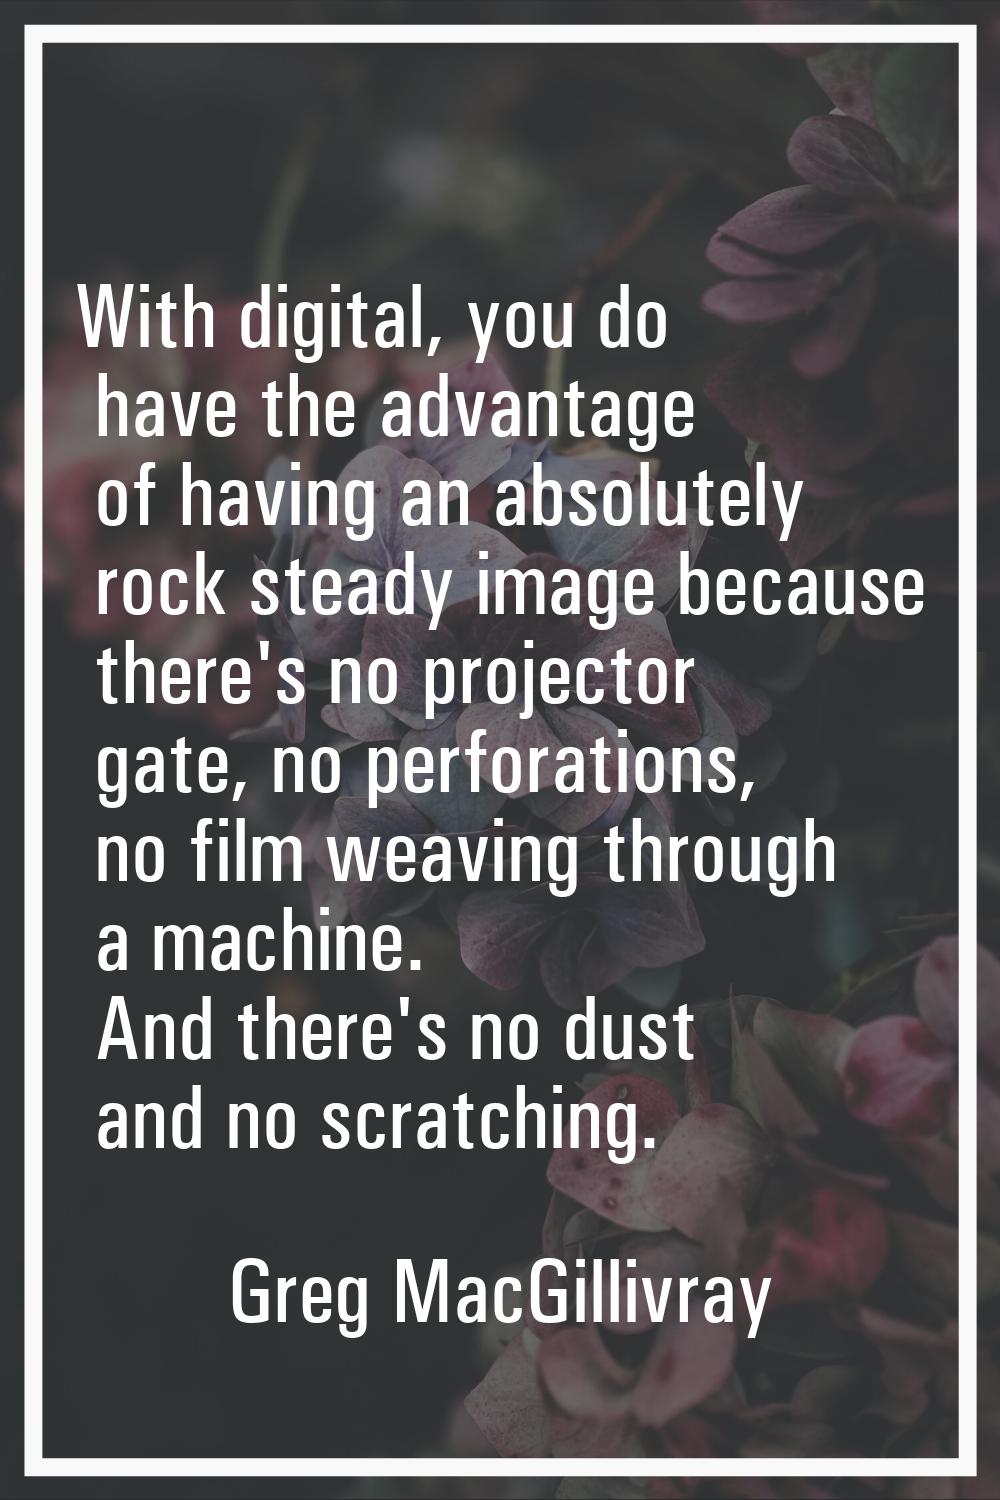 With digital, you do have the advantage of having an absolutely rock steady image because there's n